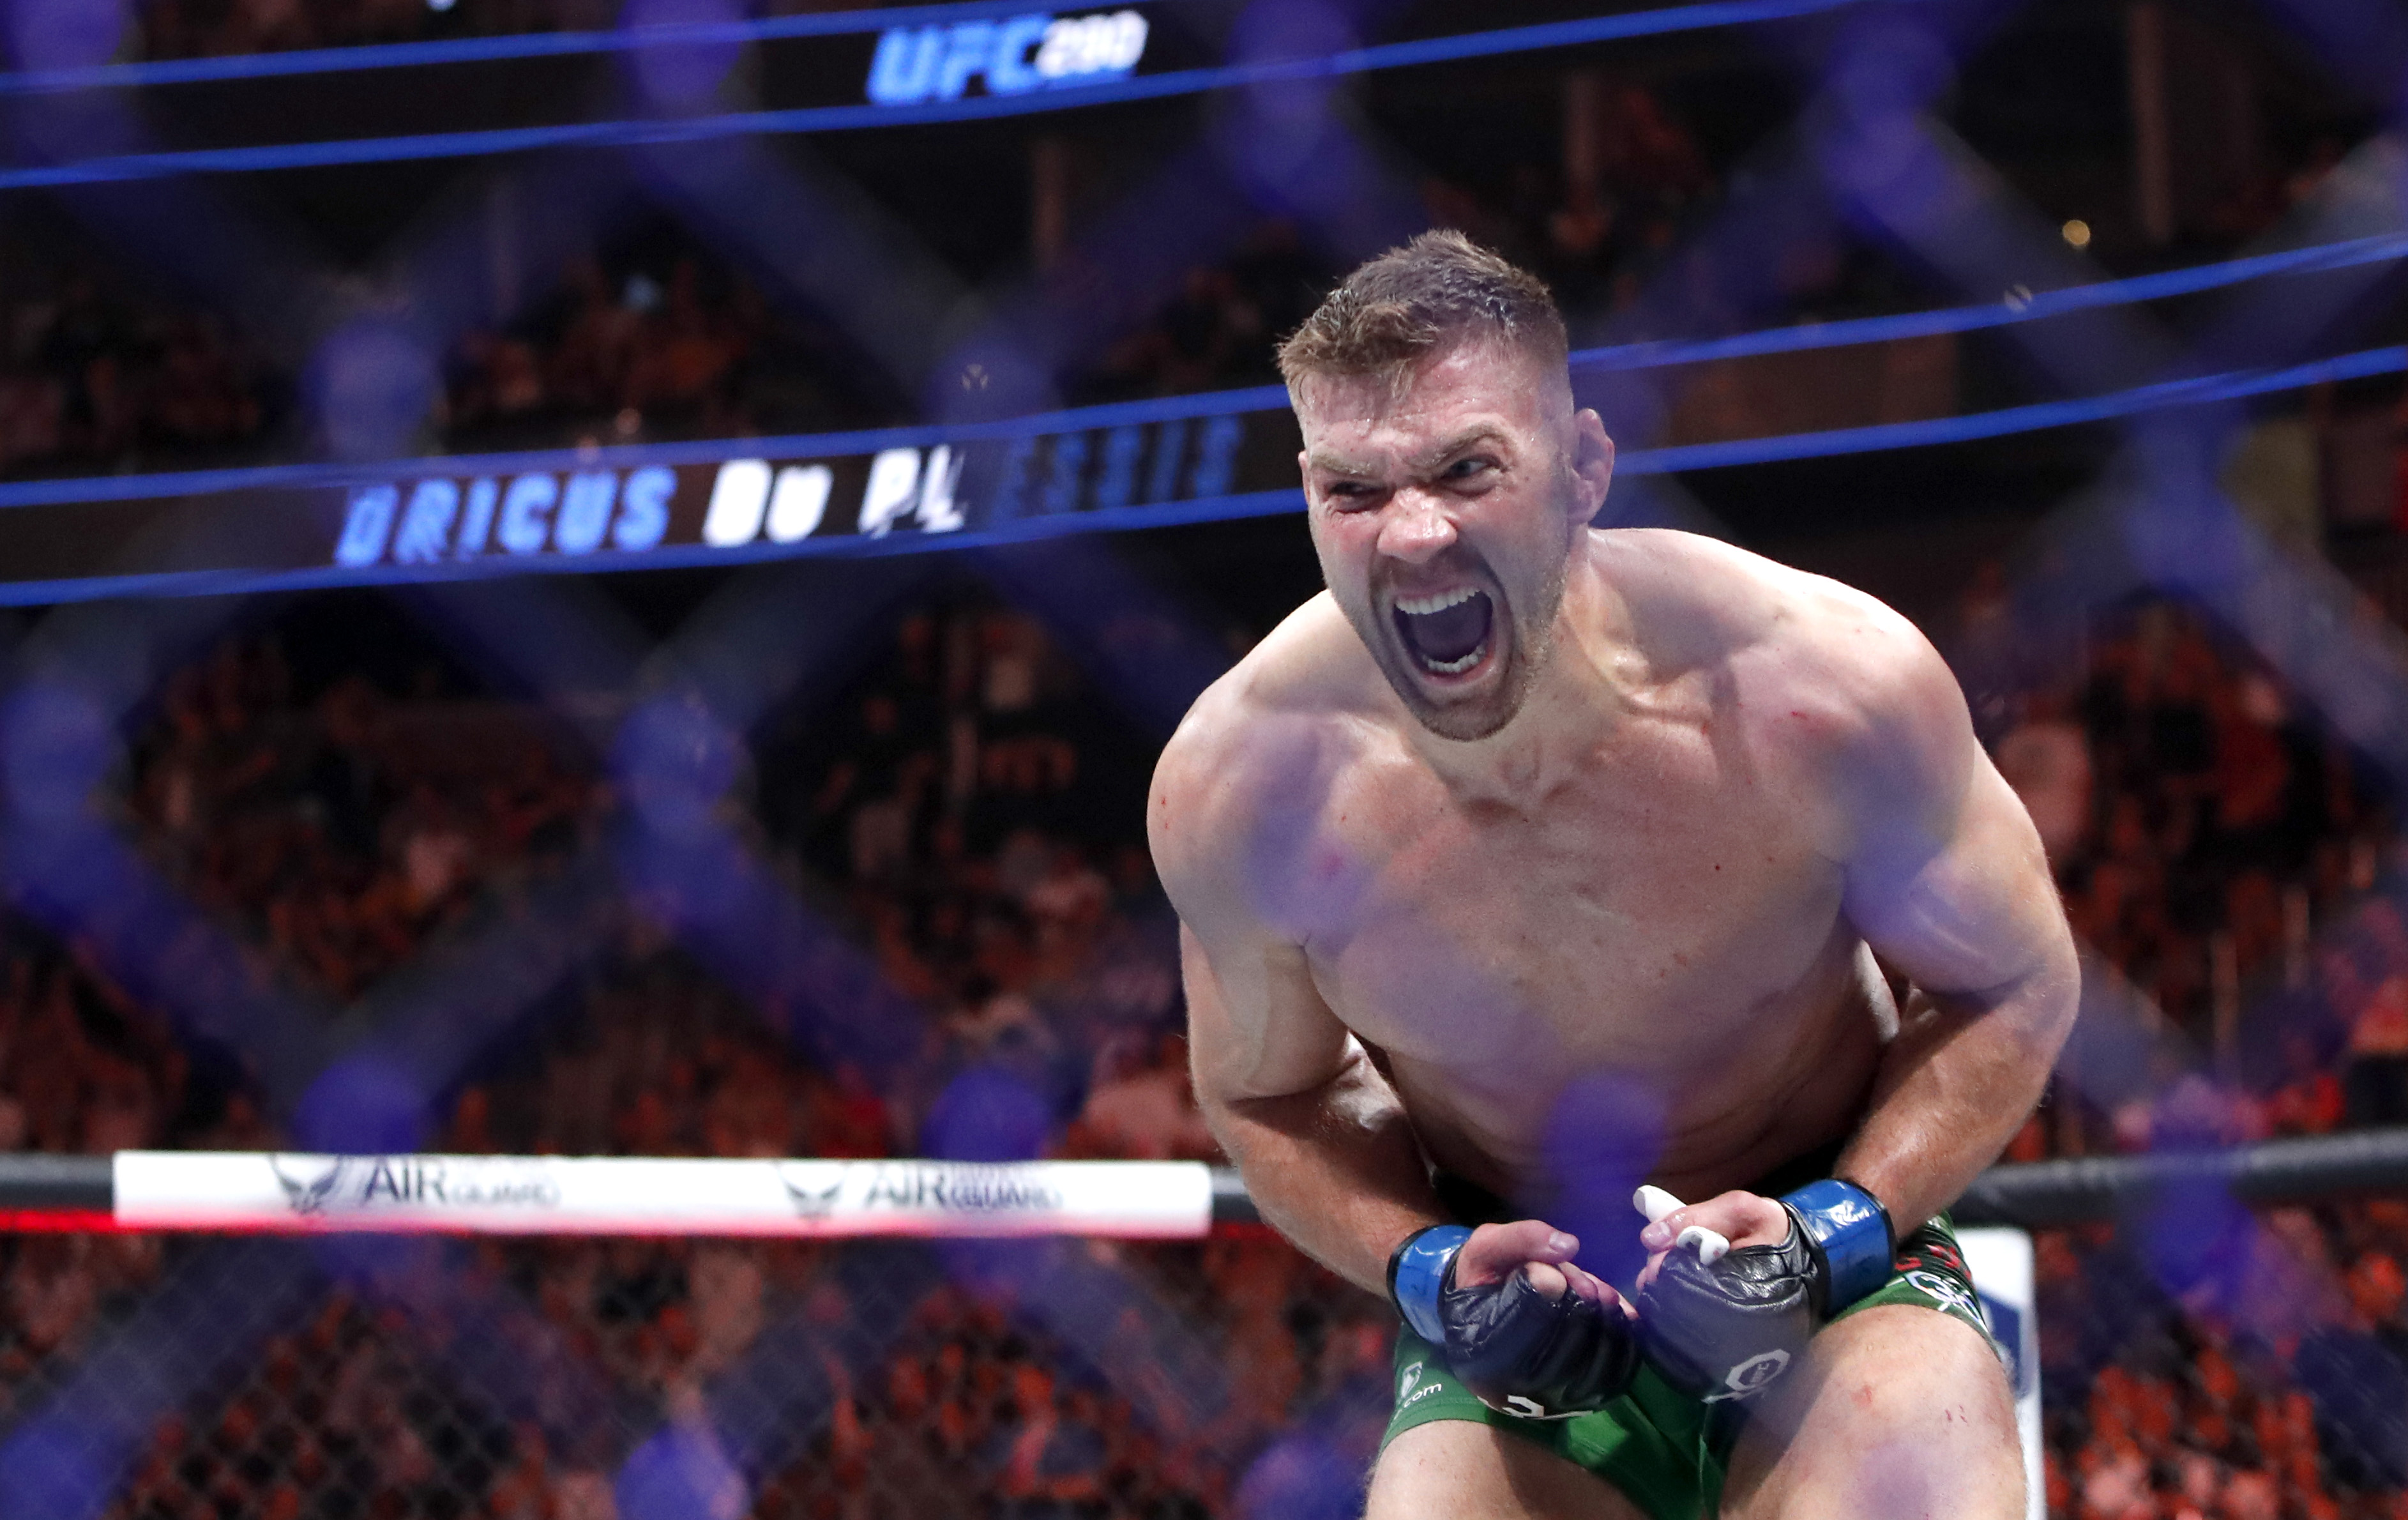 SA’s Du Plessis emerges as top dog after defeating Australia’s Whittaker at UFC 290